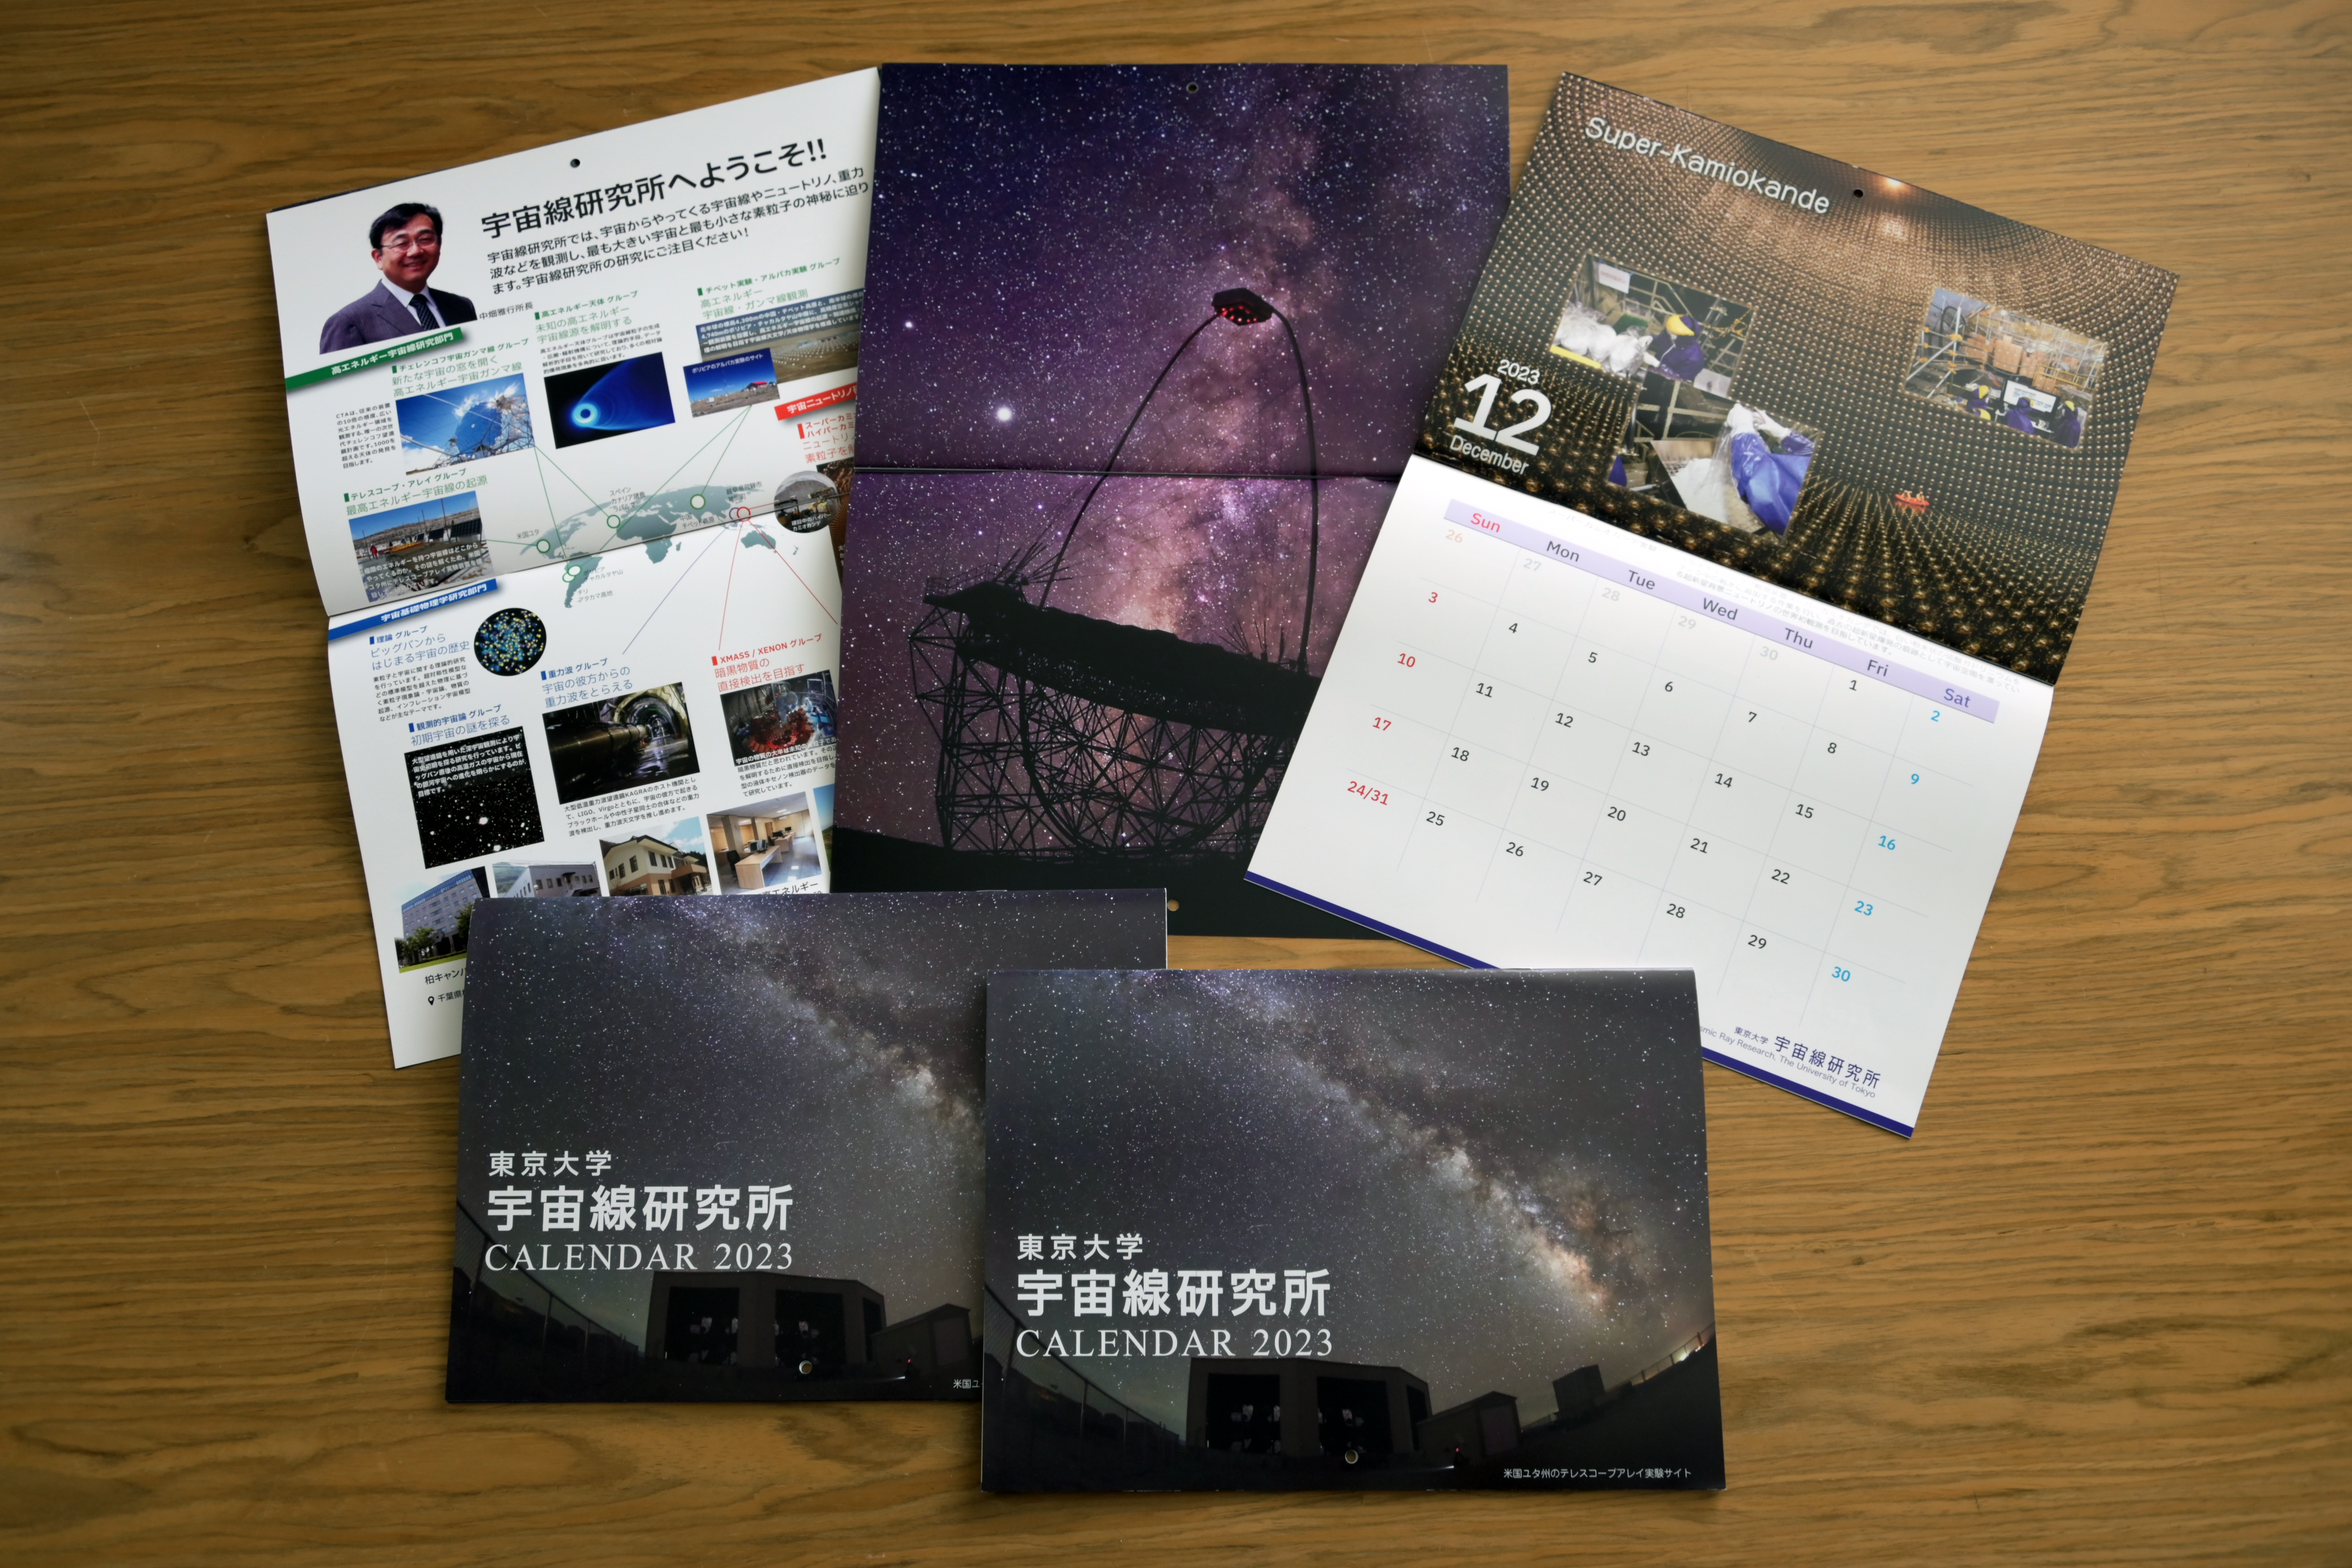 2023 ICRR Wall Calendar to be on Sale